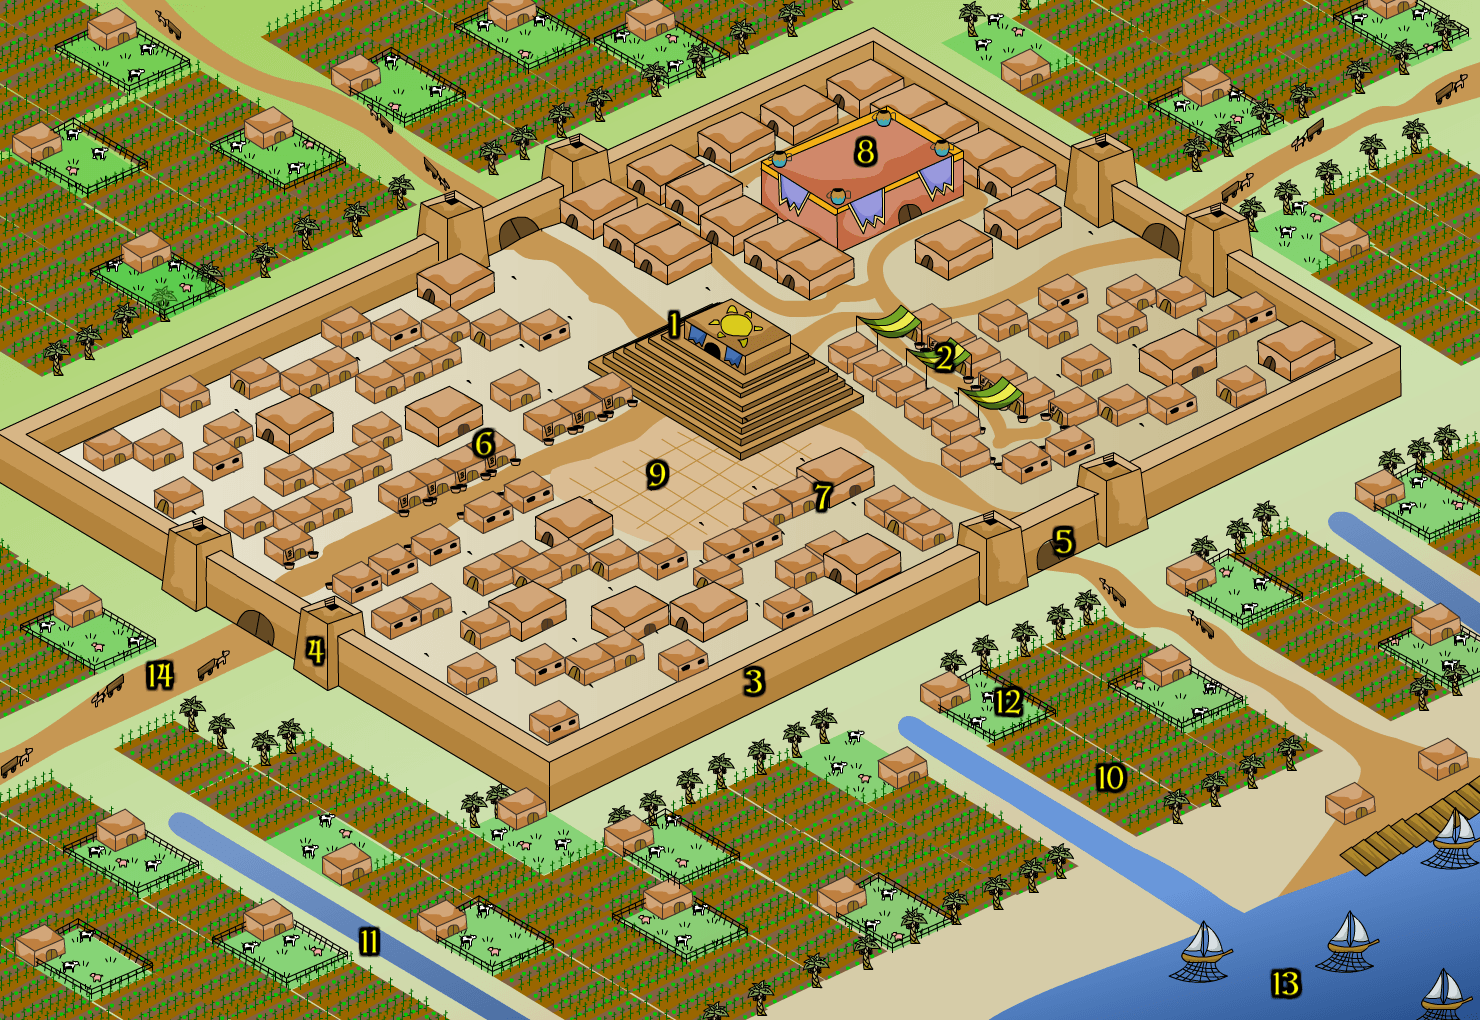 Ancient cities in mesopotamia nicewes